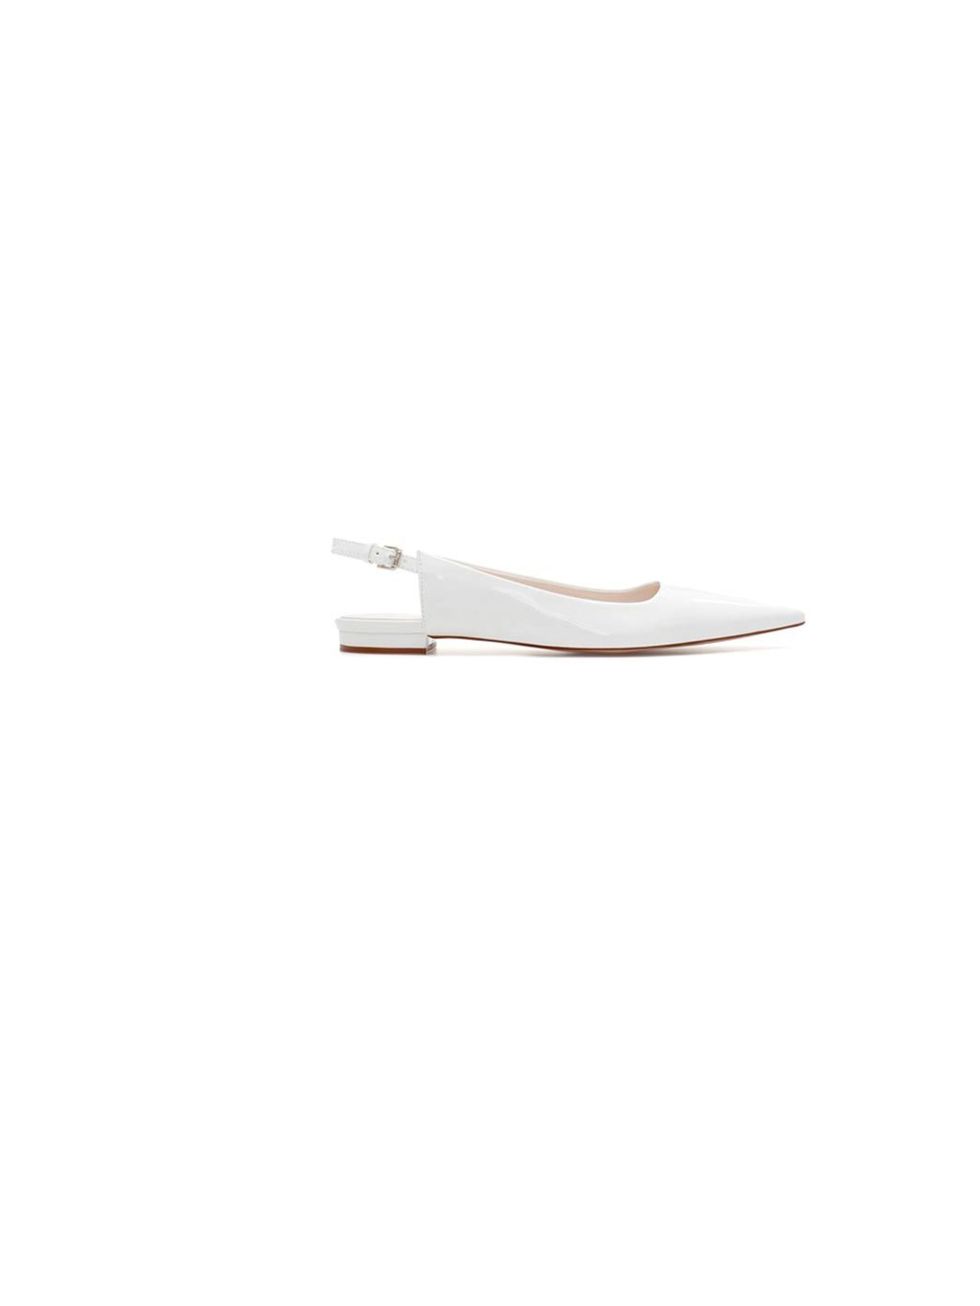 <p>Flats don't have to be boring, see <a href="http://www.zara.com/uk/en/new-collection/woman/shoes/pointed-sling-back-c269191p1296240.html">Zara</a>'s patent white slingbacks for evidence, £39.99</p>